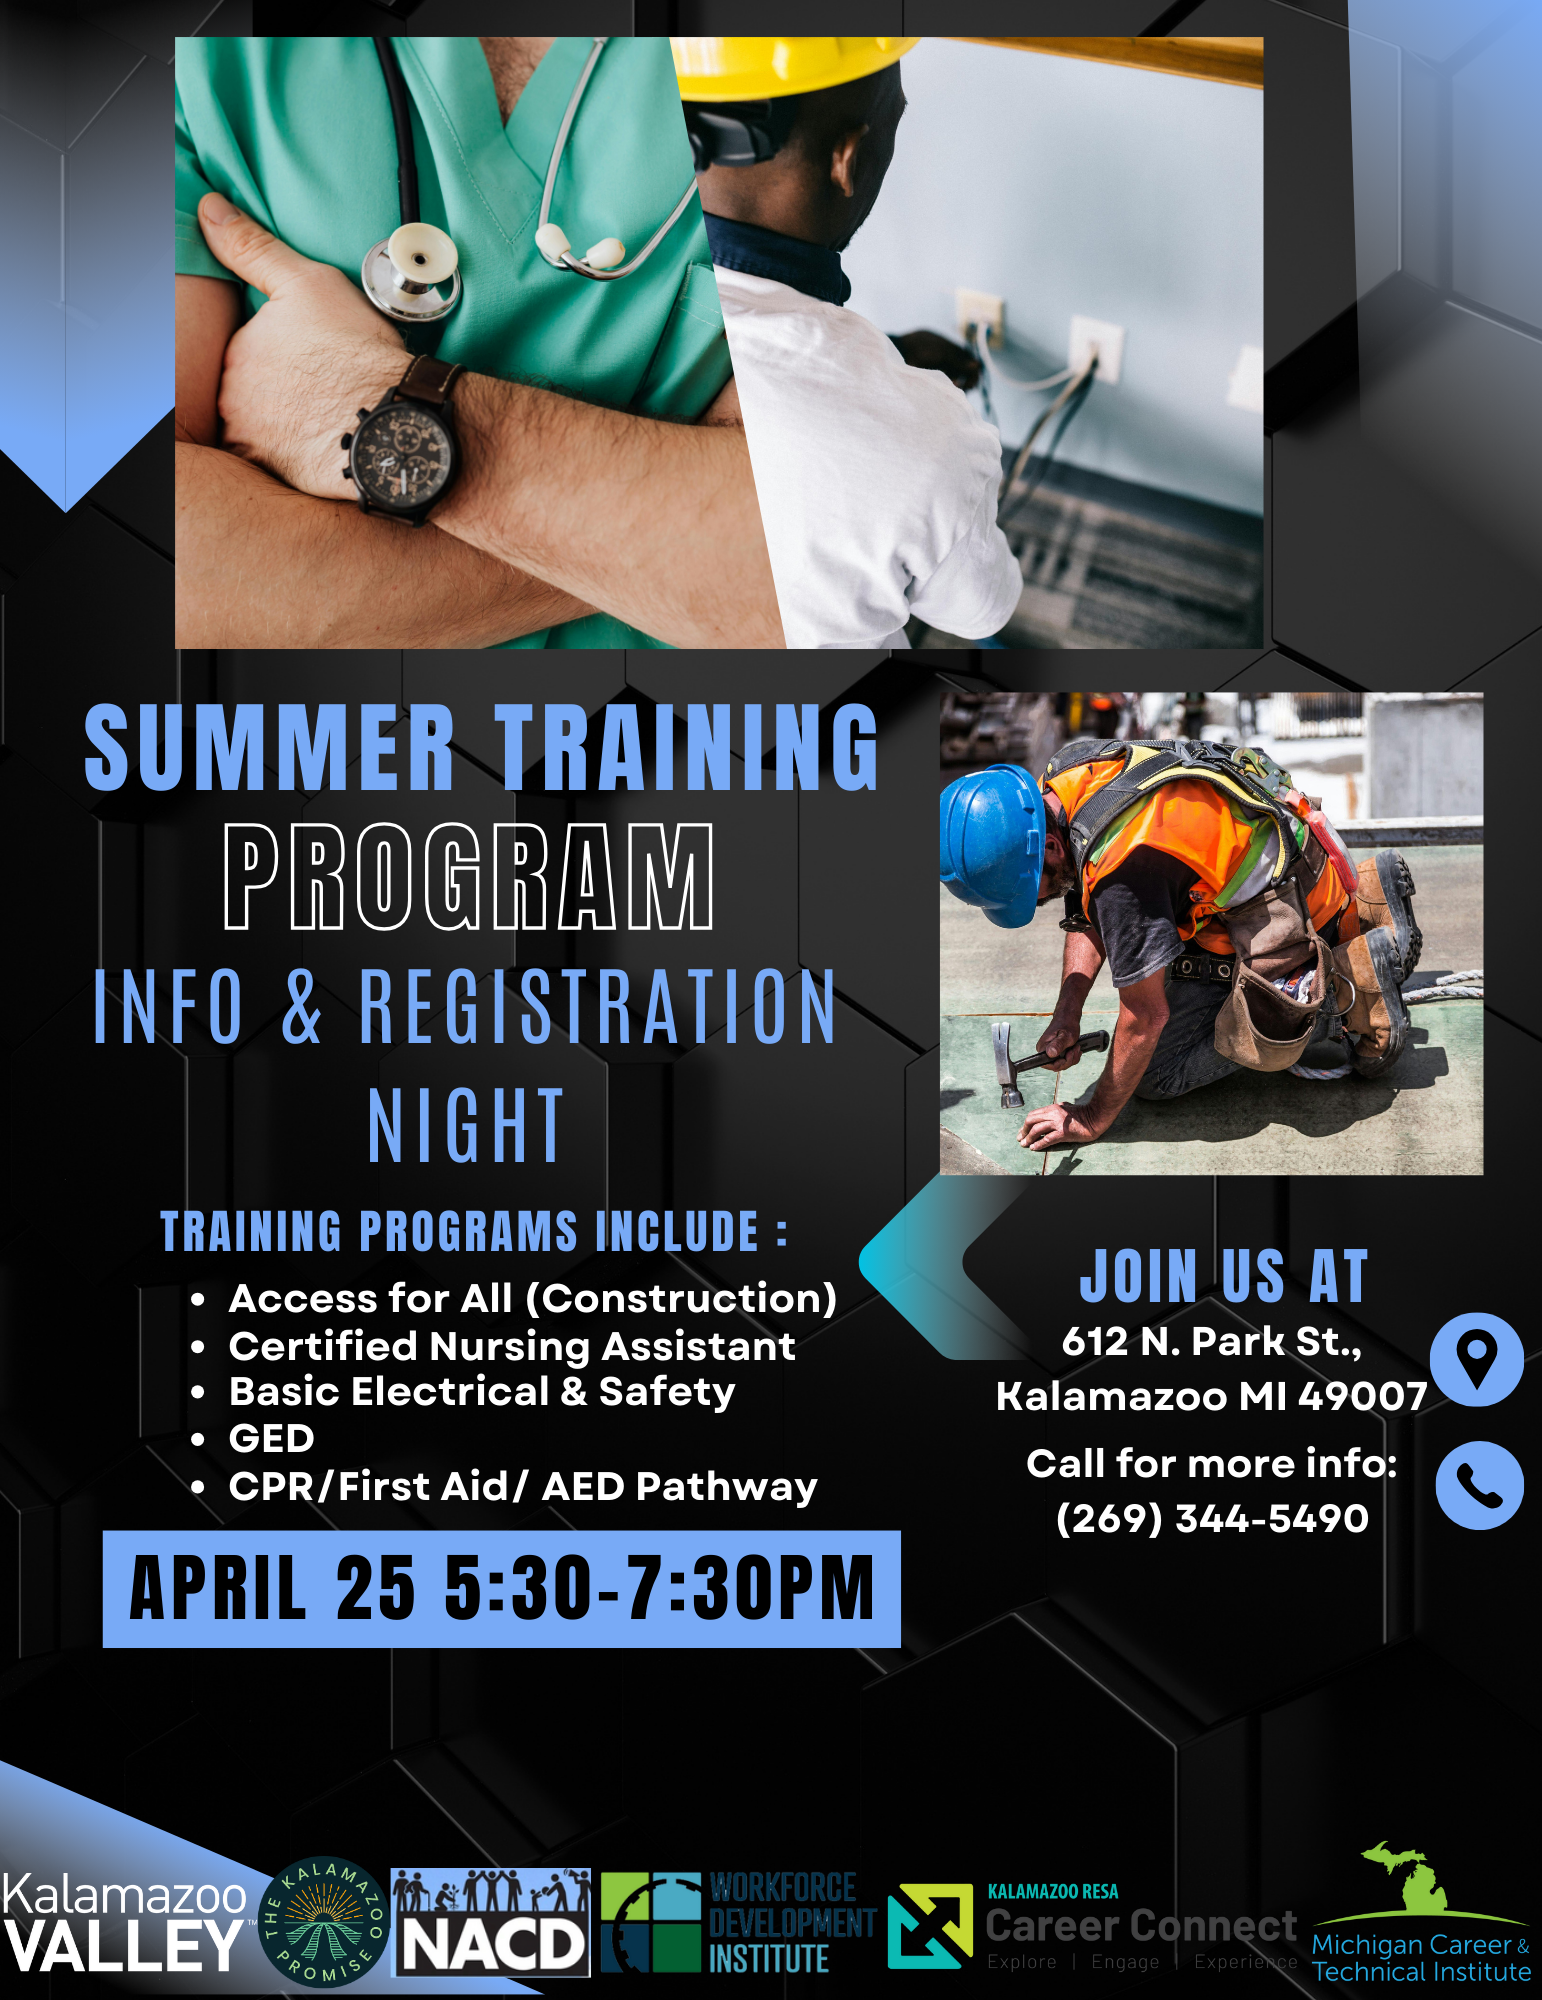 Summer training info and registration night. Training programs include Access For All, Certified Nursing Assistant, Basic Electrical and Safety, GED, CPR and First Aid. April 25 from 5:30pm-7:30pm. Location is 612 N. Park St., Kalamazoo, MI 49007. Call for more info at (269) 344-5490